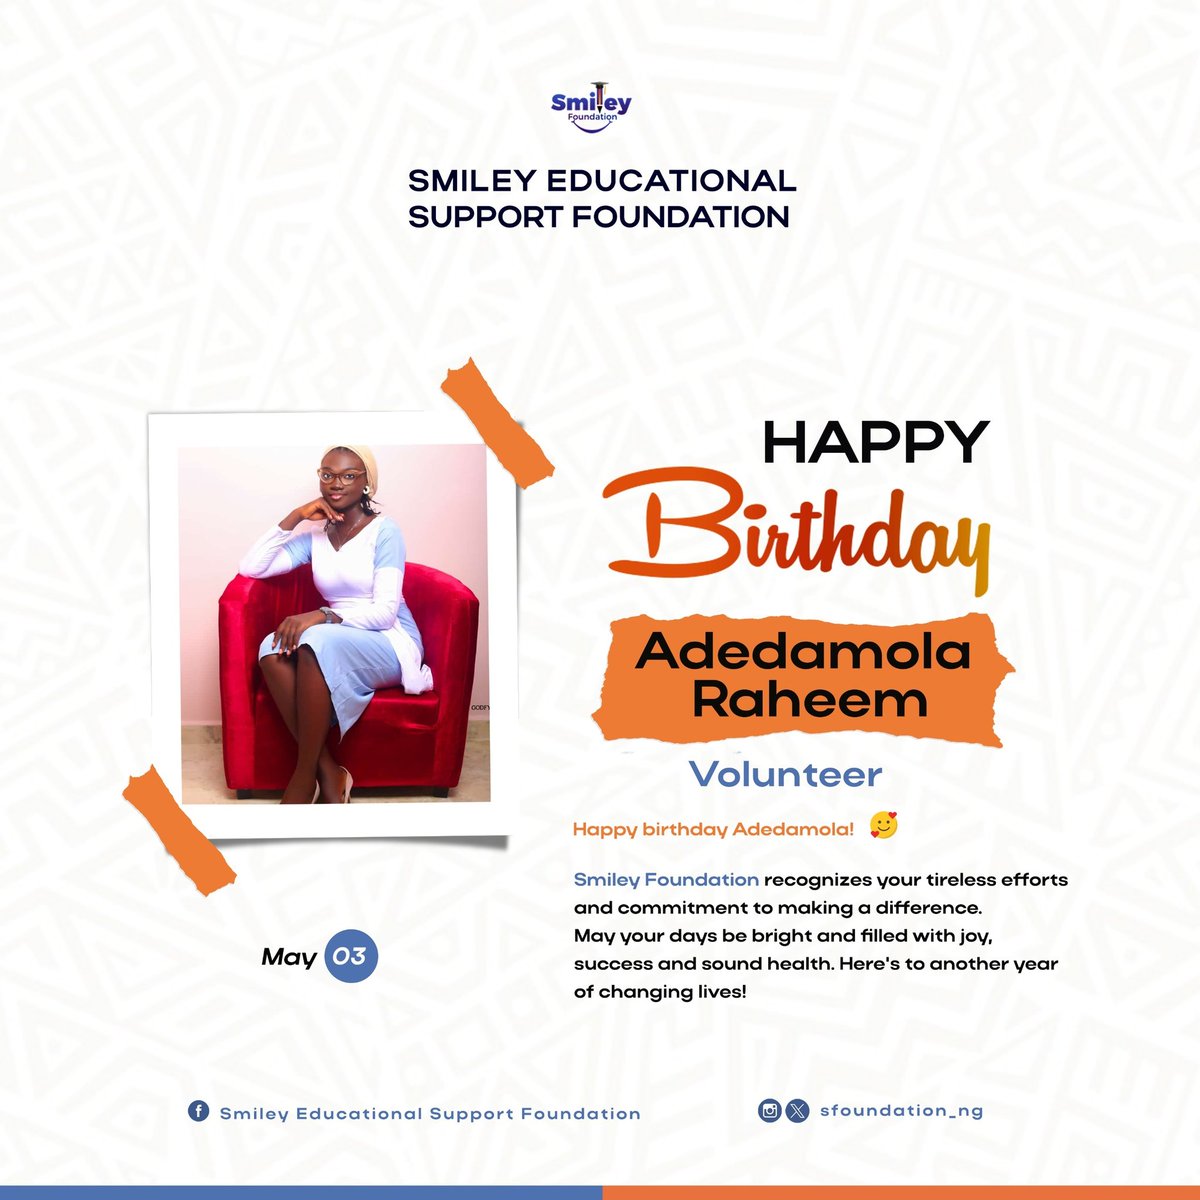 Happy birthday Adedamola 🥳🎉
Smiley Foundation recognizes your tireless efforts and commitment to making a difference. 

May your days be bright and filled with joy, success and sound health. Here's to another year of changing lives! 🥂  🎂 

#SmileyFoundation
#HappyBirthday